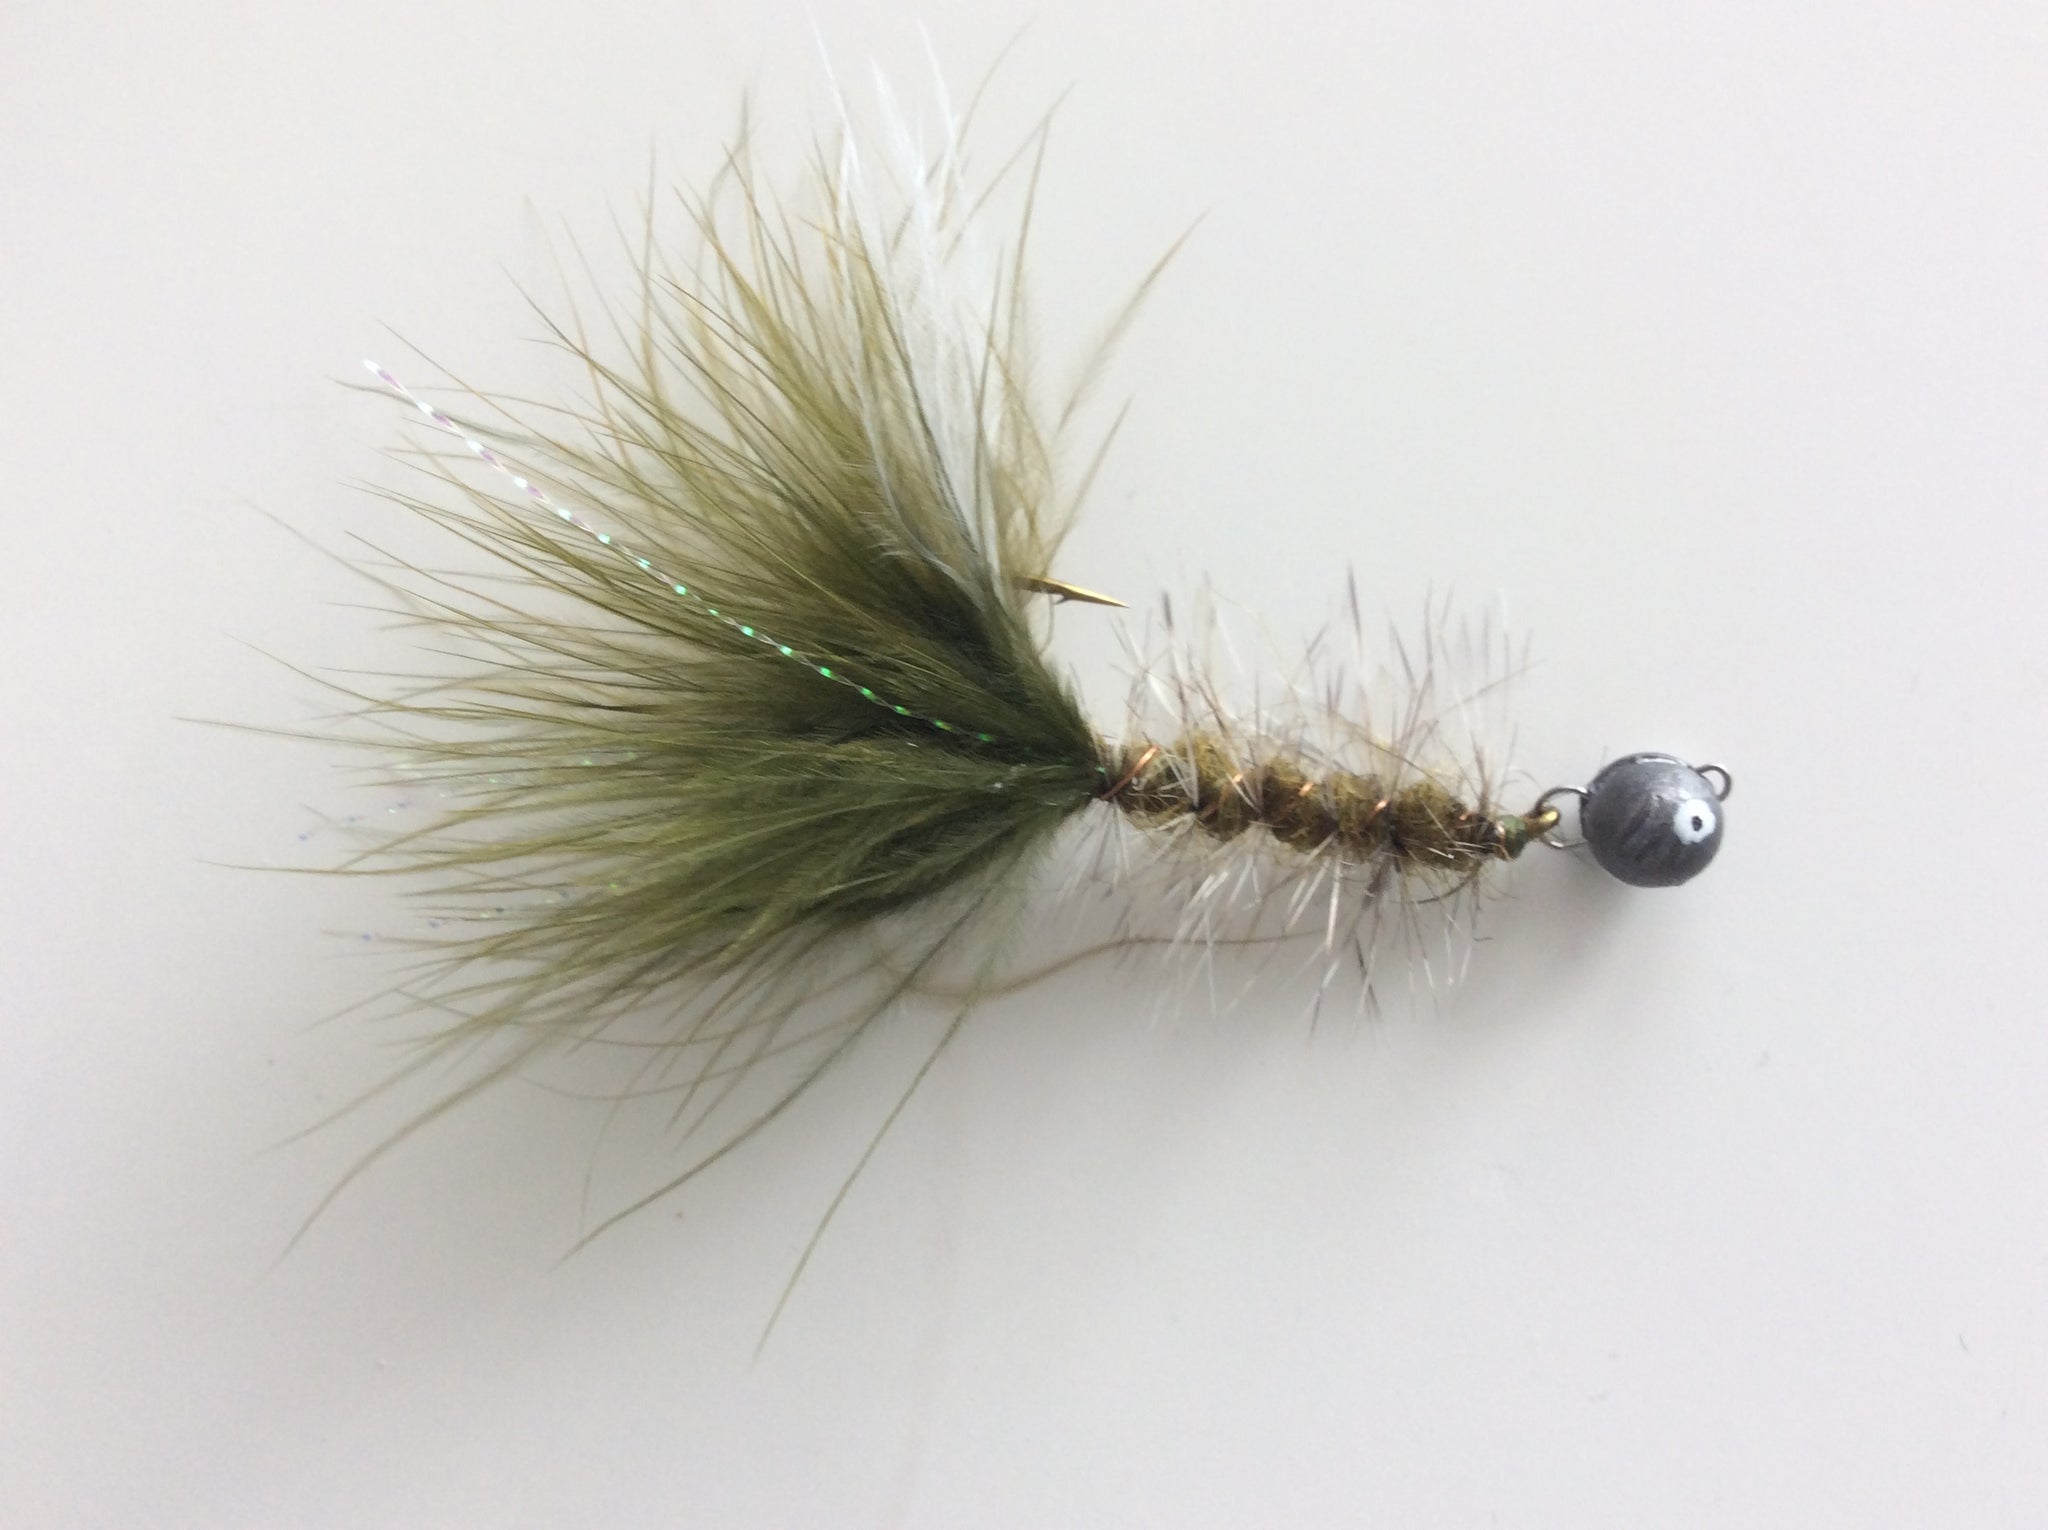 Brown Trout Twitching Lure Leech - Handmade by Off Trail Tackle